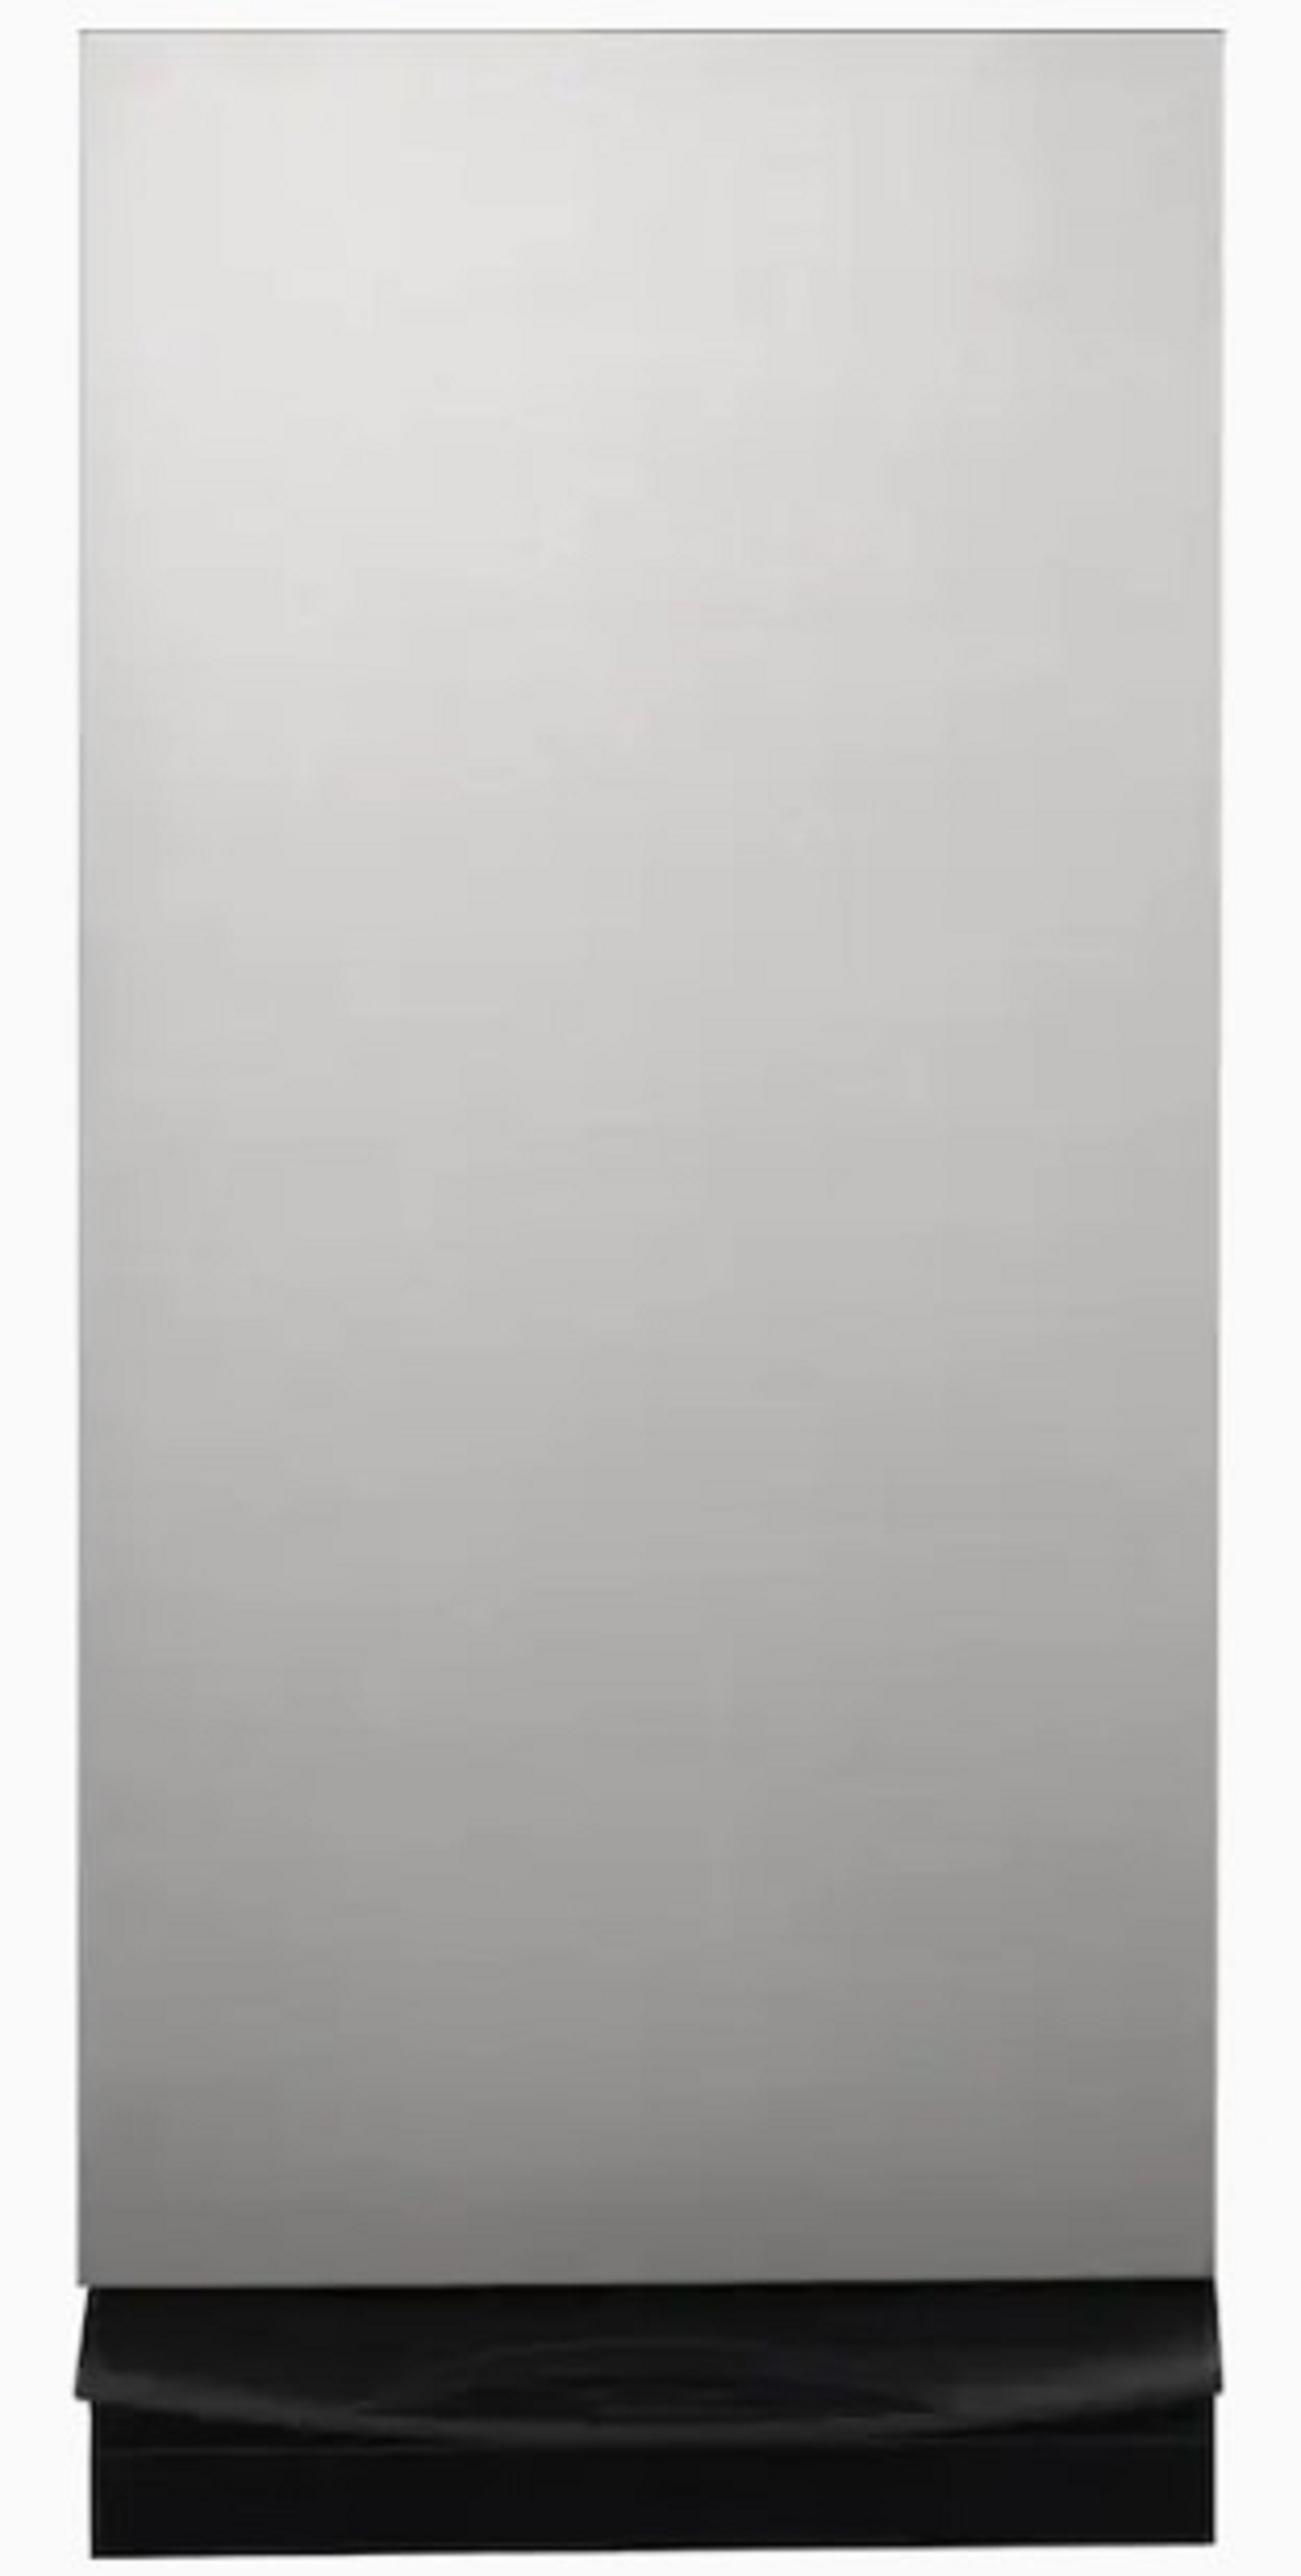 GE Appliances UCG1520NSS 15" 1.4 cu.ft. Stainless Steel Built-In Trash Compactor